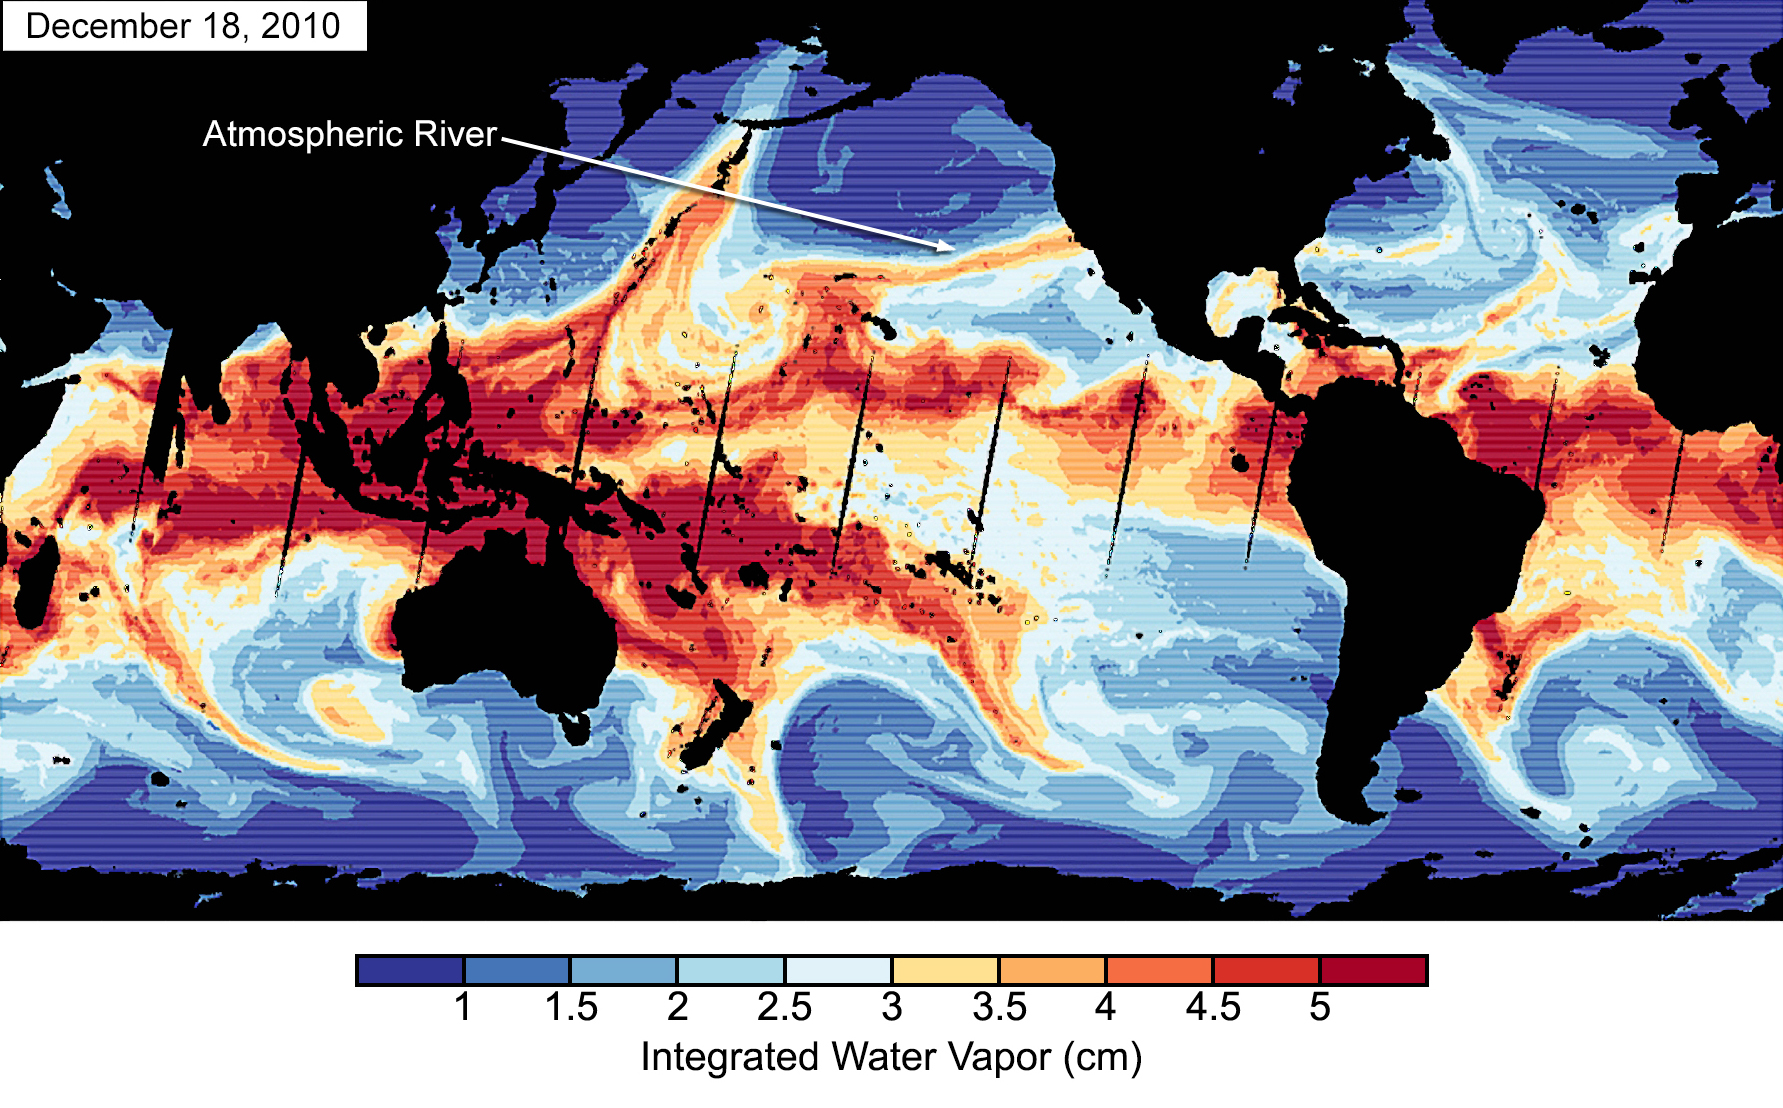 Satellite water-vapor measurements from Dec. 18, 2010, show an atmospheric river making landfall in California. Continents appear in black. The belt of very moist air (red) centered on the equator is the reservoir that supplies atmospheric rivers. On this date, the AO and PNA were both in their negative phases. Water vapor data from the Special Sensor Microwave Imager and the Special Sensor Microwave Imager/Sounder instruments on Defense Meteorological Satellite Program satellites. Image credit: Bin Guan, NASA/JPL-Caltech and UCLA.